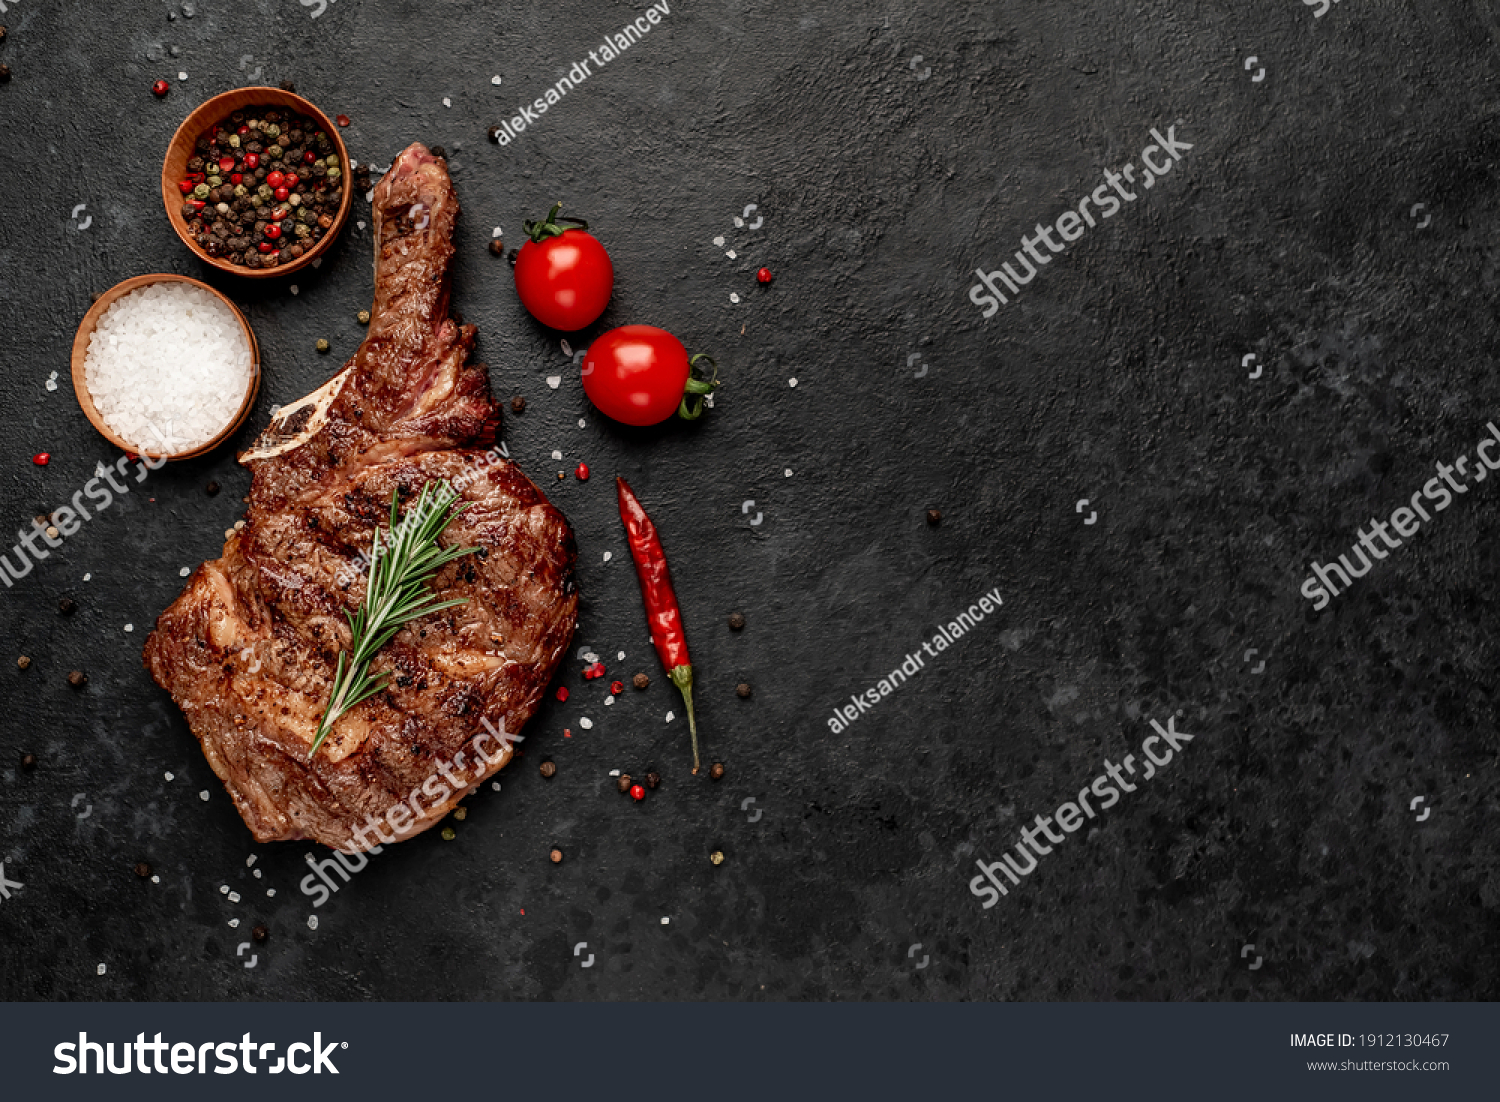 grilled cowboy steak with spices  on a stone background with copy space for your text #1912130467